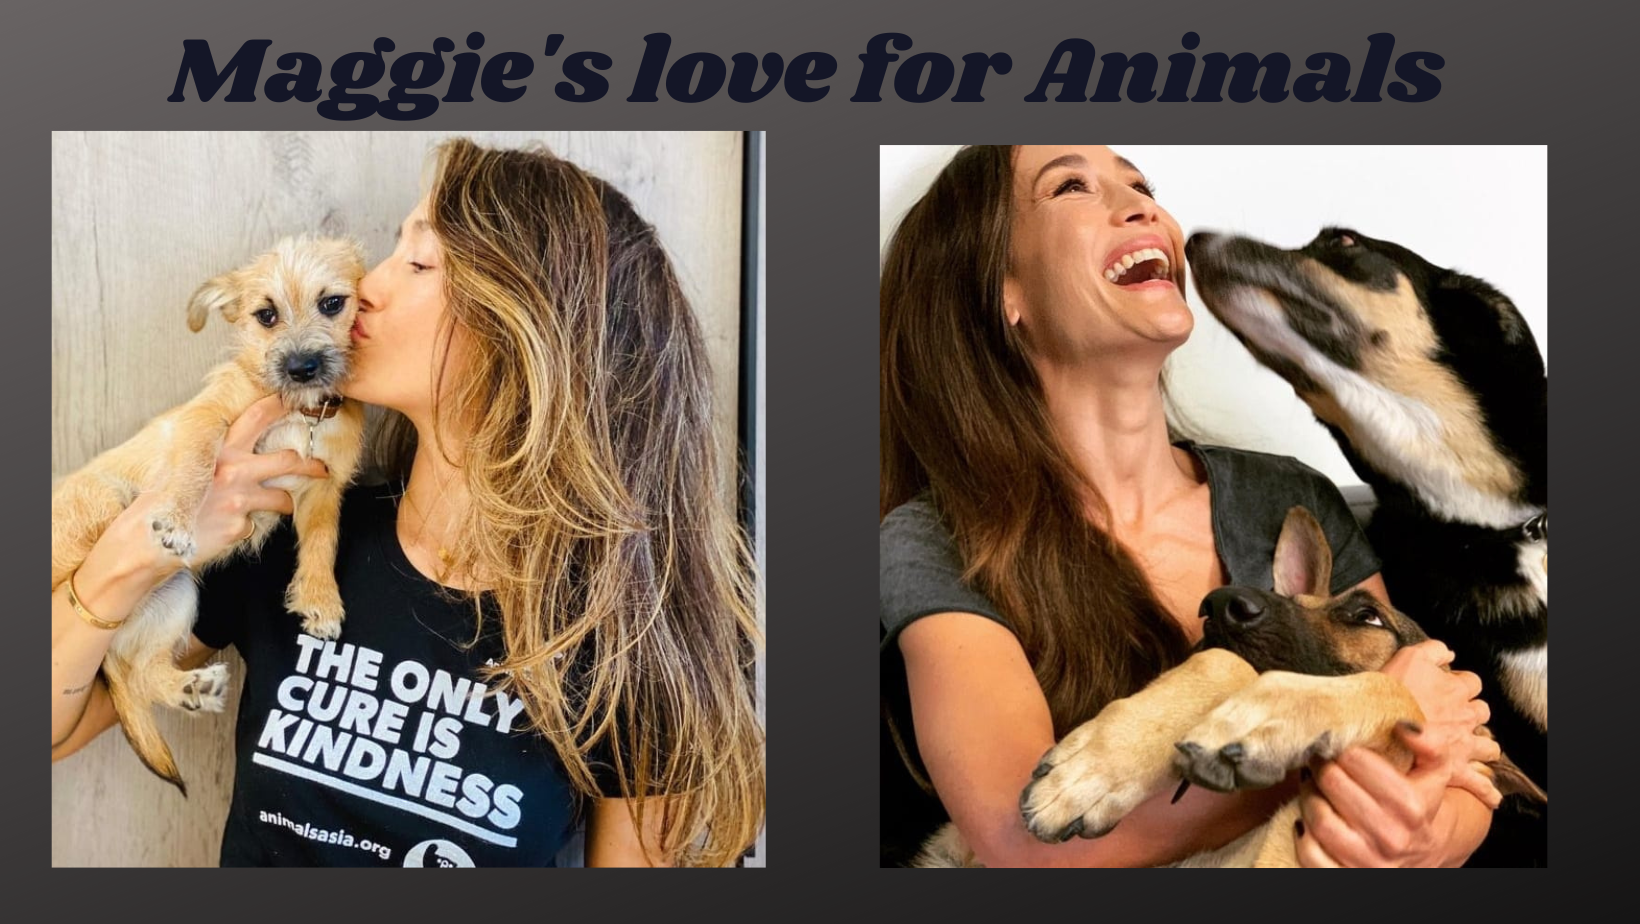 Maggie's love for animals